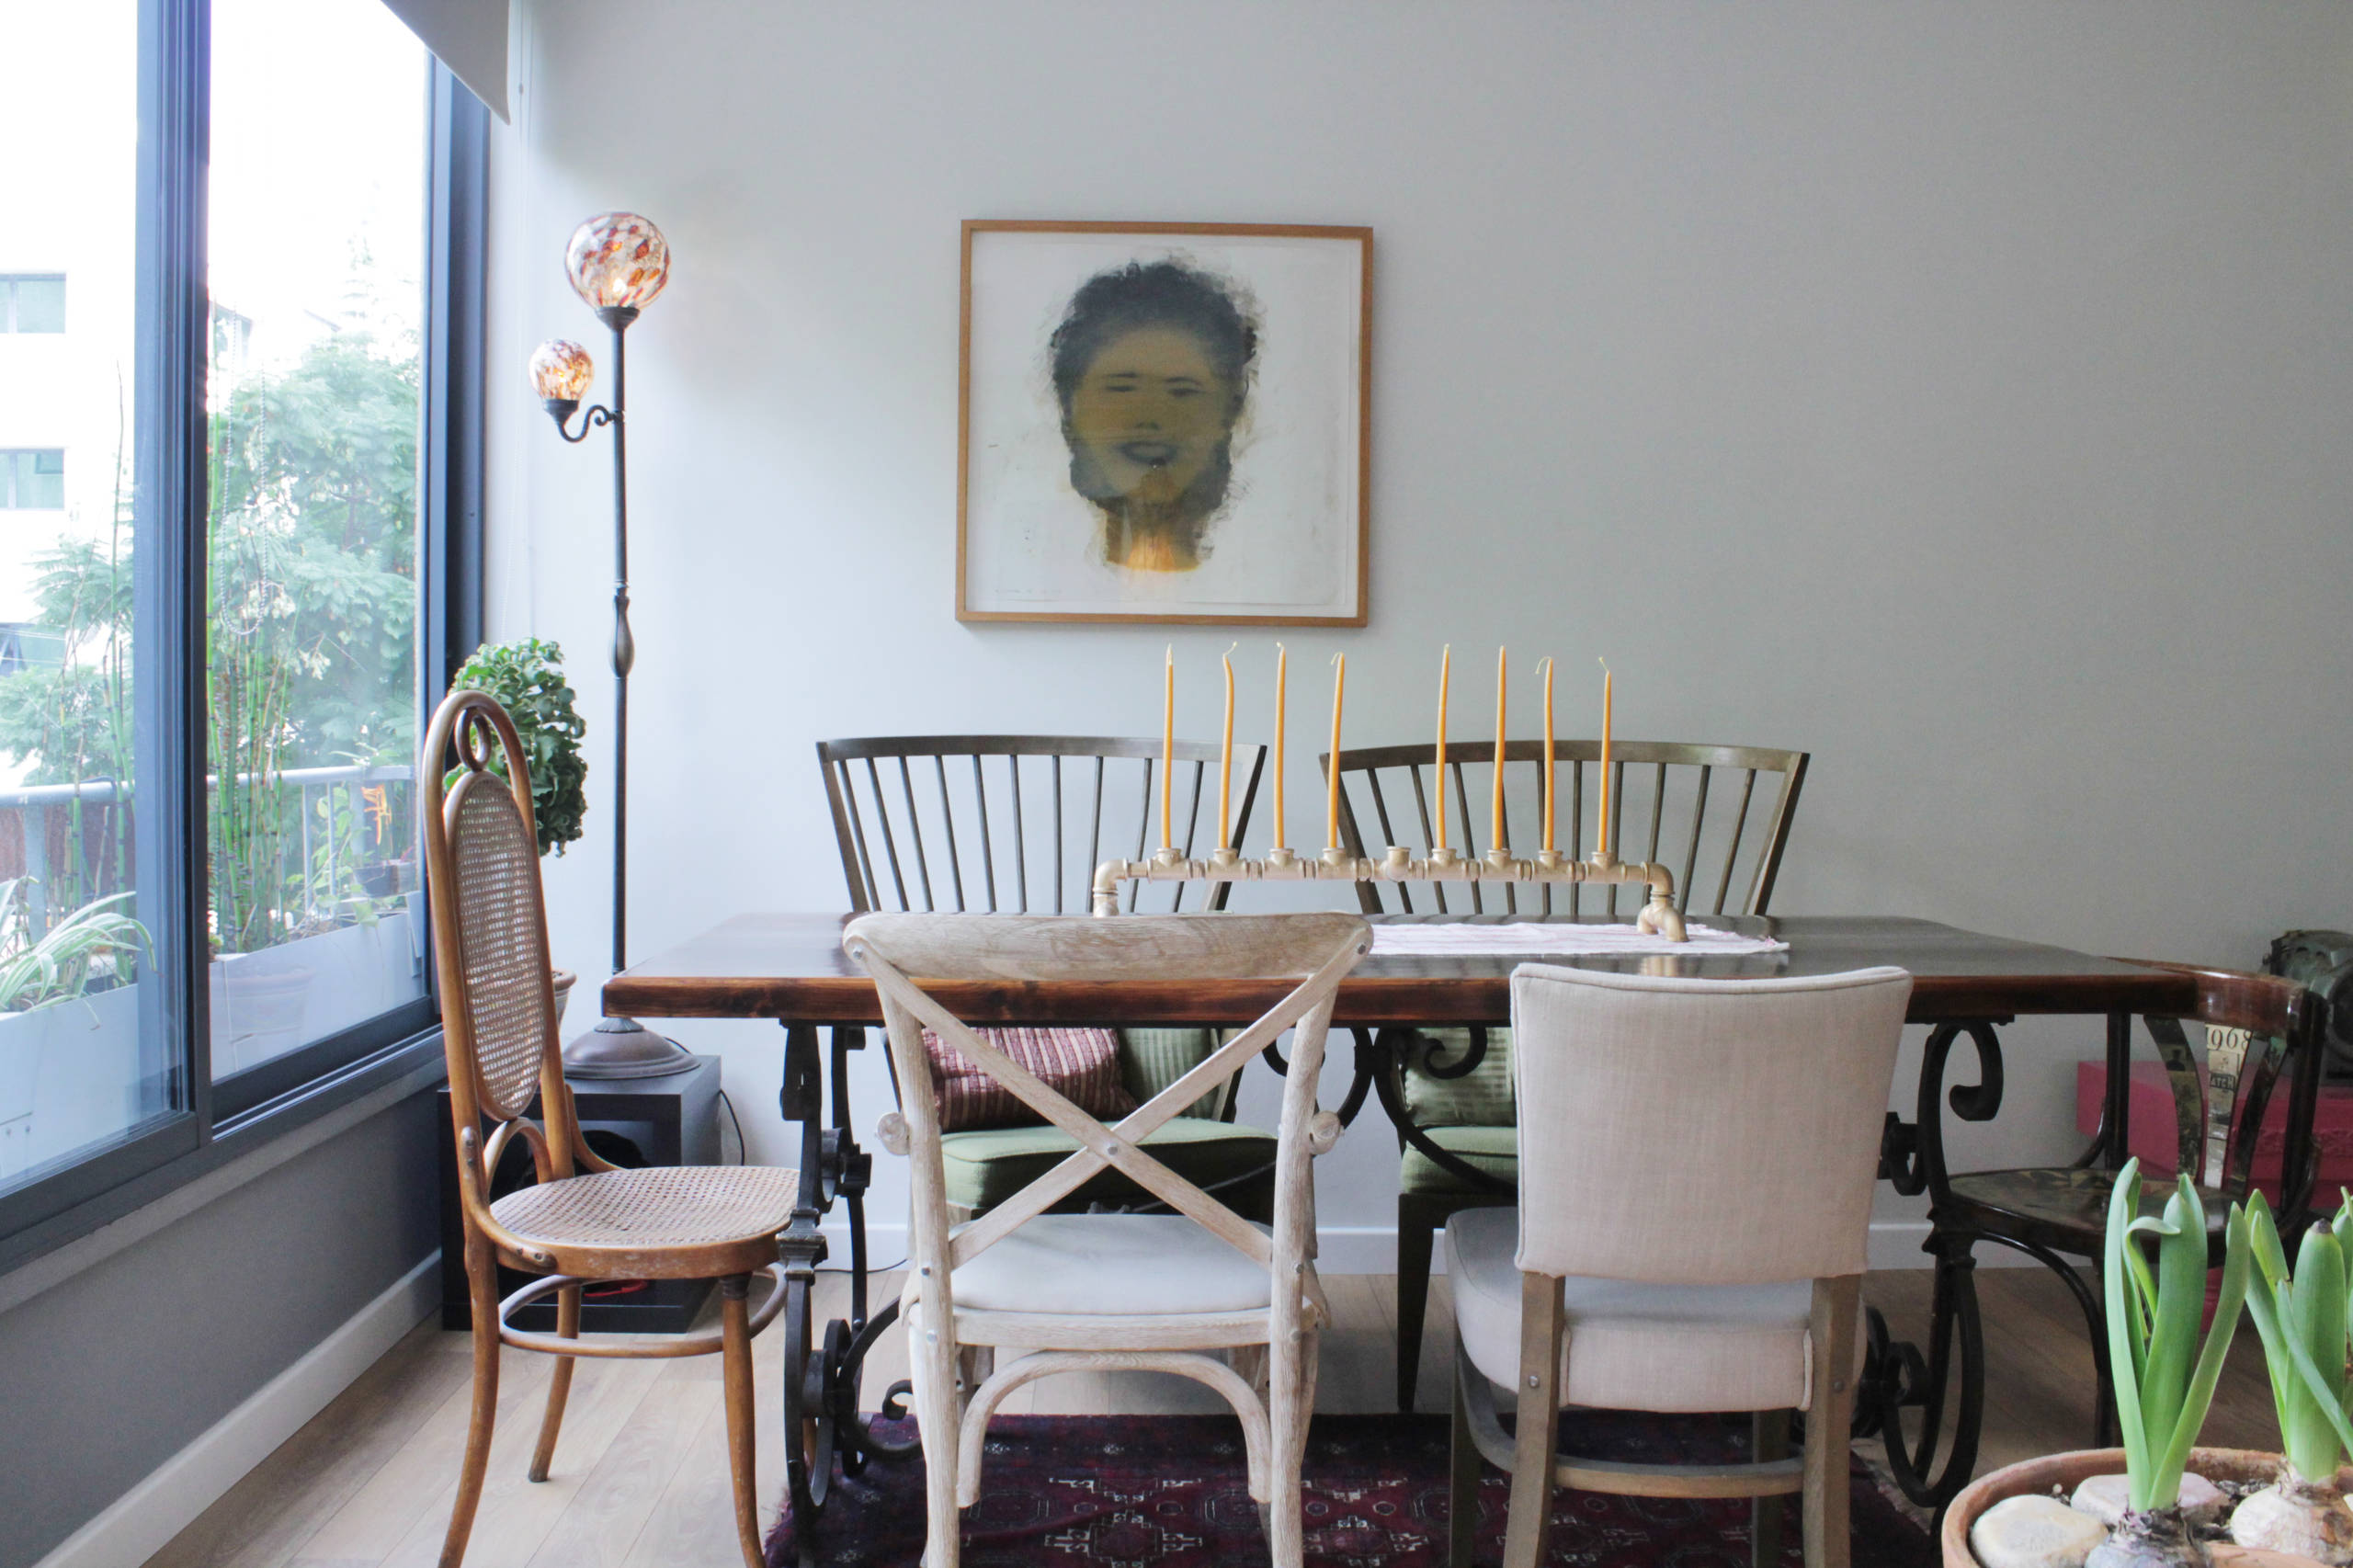 Mismatched or Matching Dining Chairs – Which Would You Go For? | Houzz UK